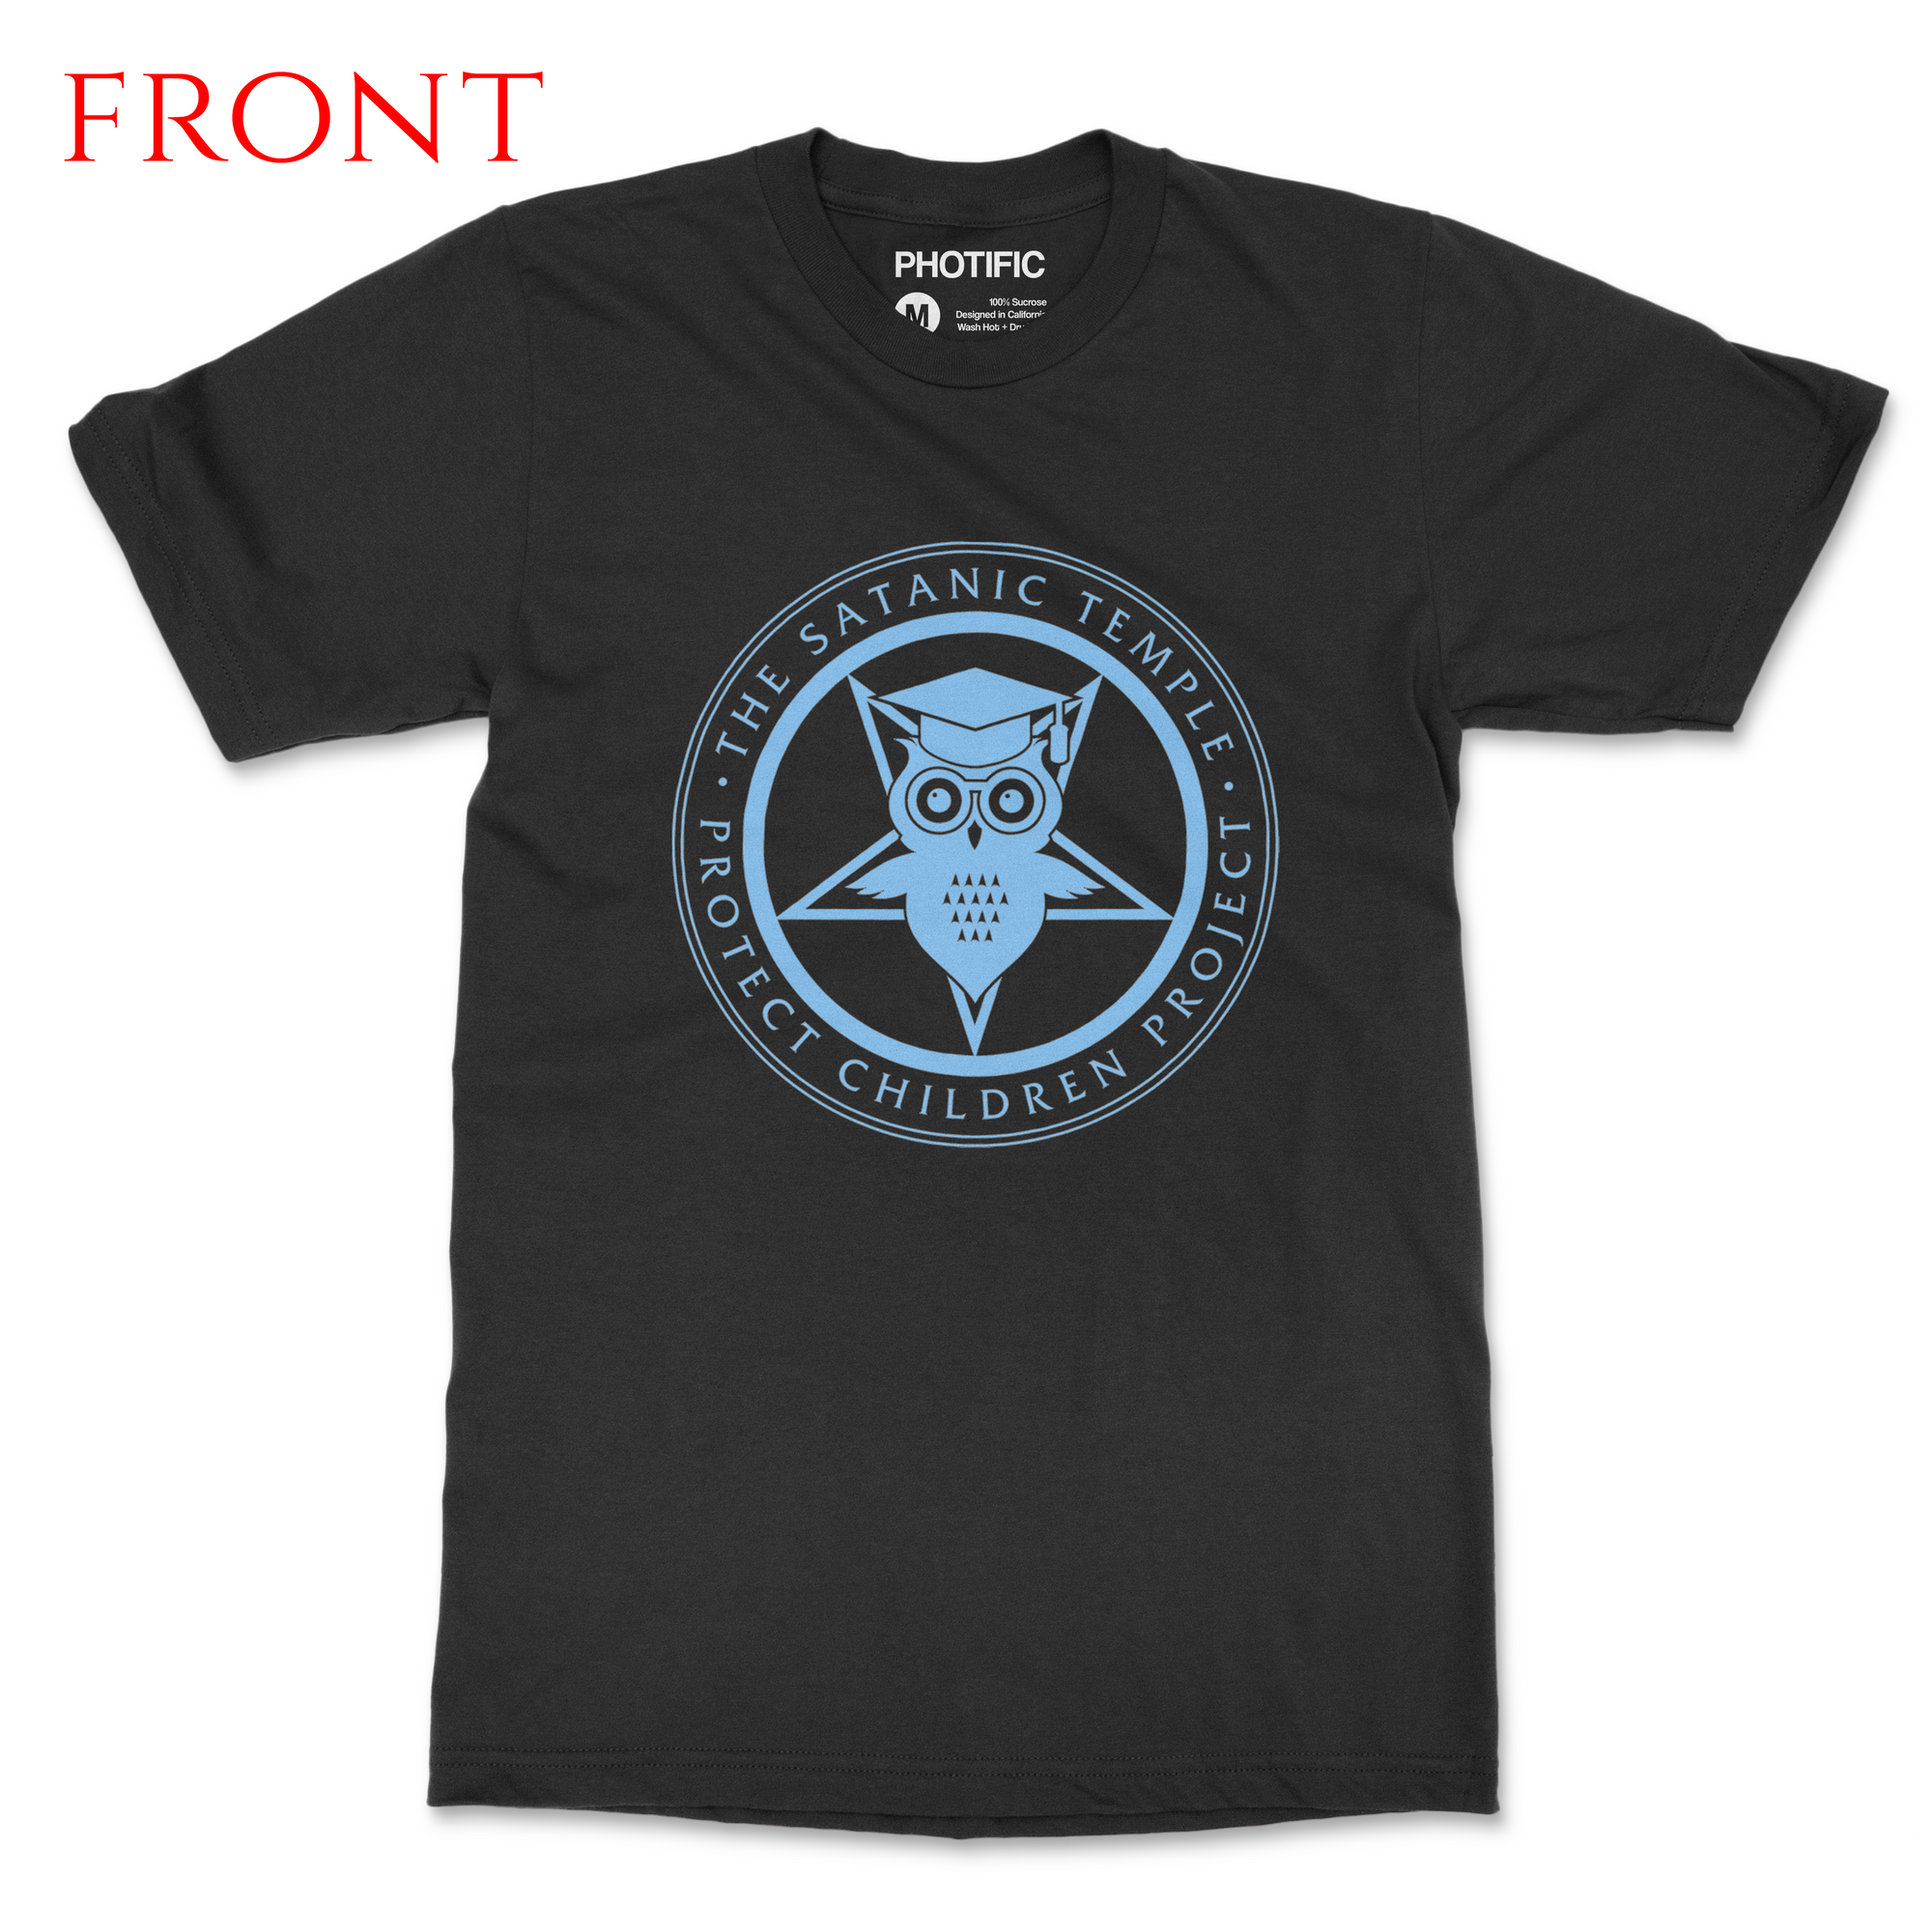 Protect Children Project T-Shirt